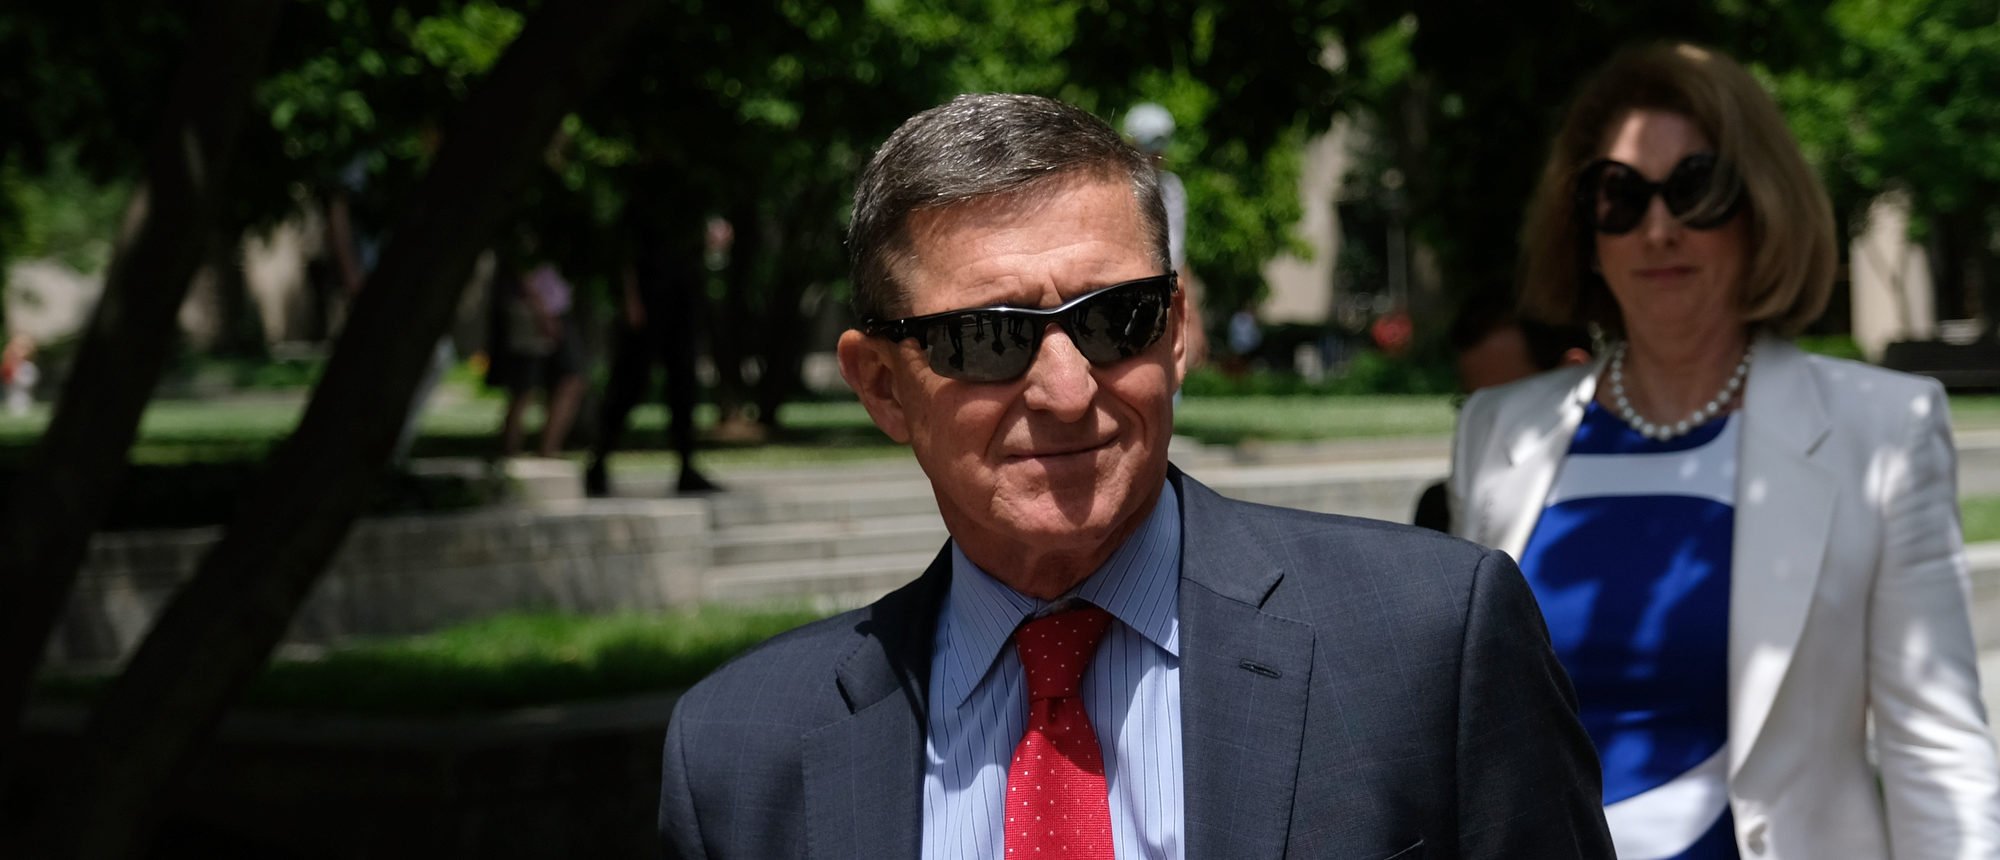 WASHINGTON, DC - JUNE 24: President Donald Trump’s former National Security Adviser Michael Flynn leaves the E. Barrett Prettyman U.S. Courthouse on June 24, 2019 in Washington, DC. Criminal sentencing for Flynn will be on hold for at least another two months. (Photo by Alex Wroblewski/Getty Images)